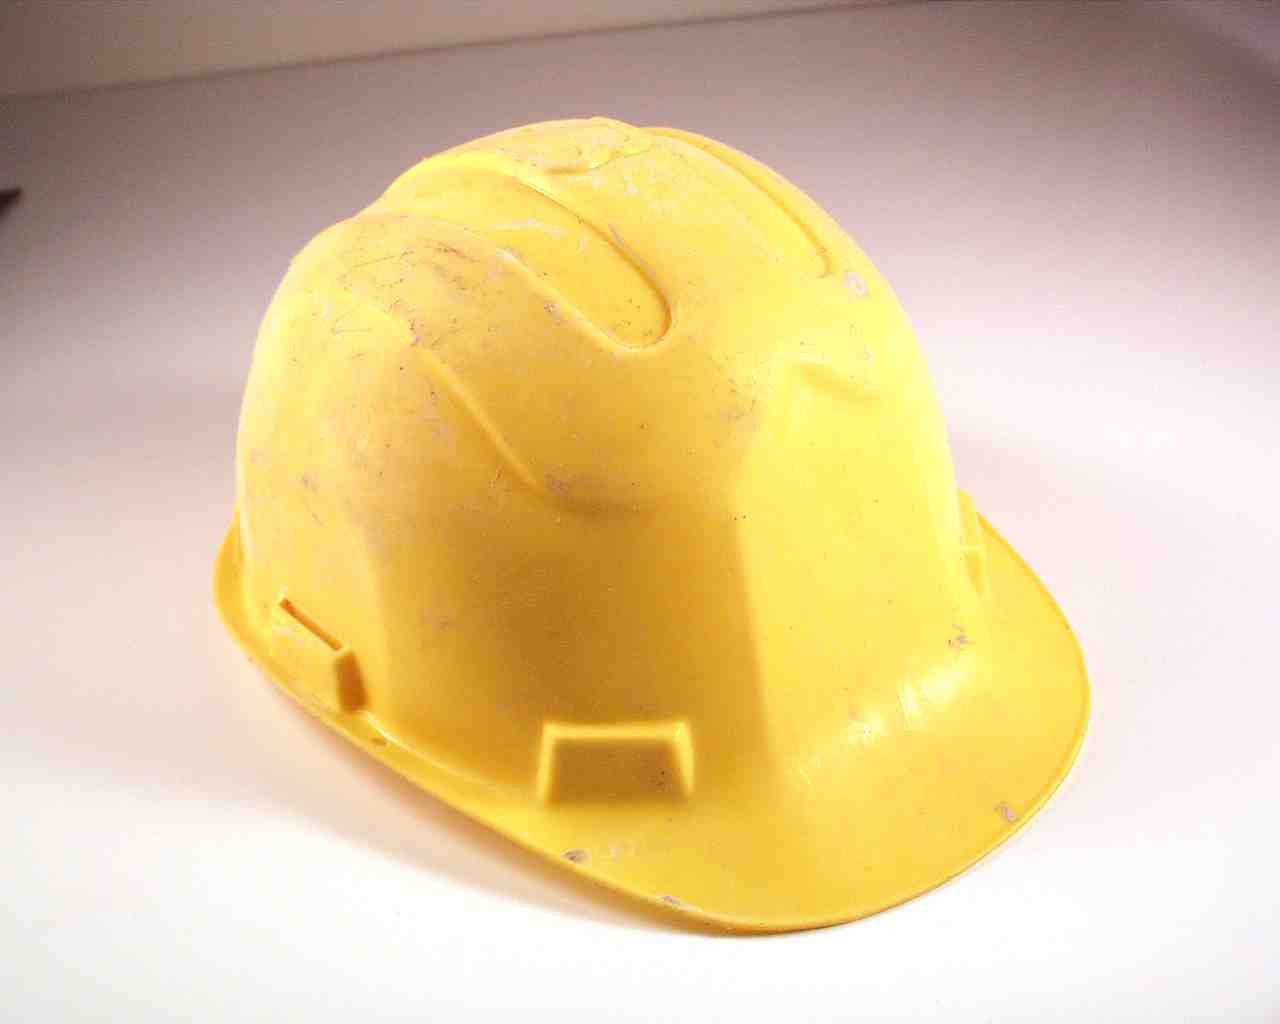 Lessons learned from past construction accidents can help improve safety for other workers.